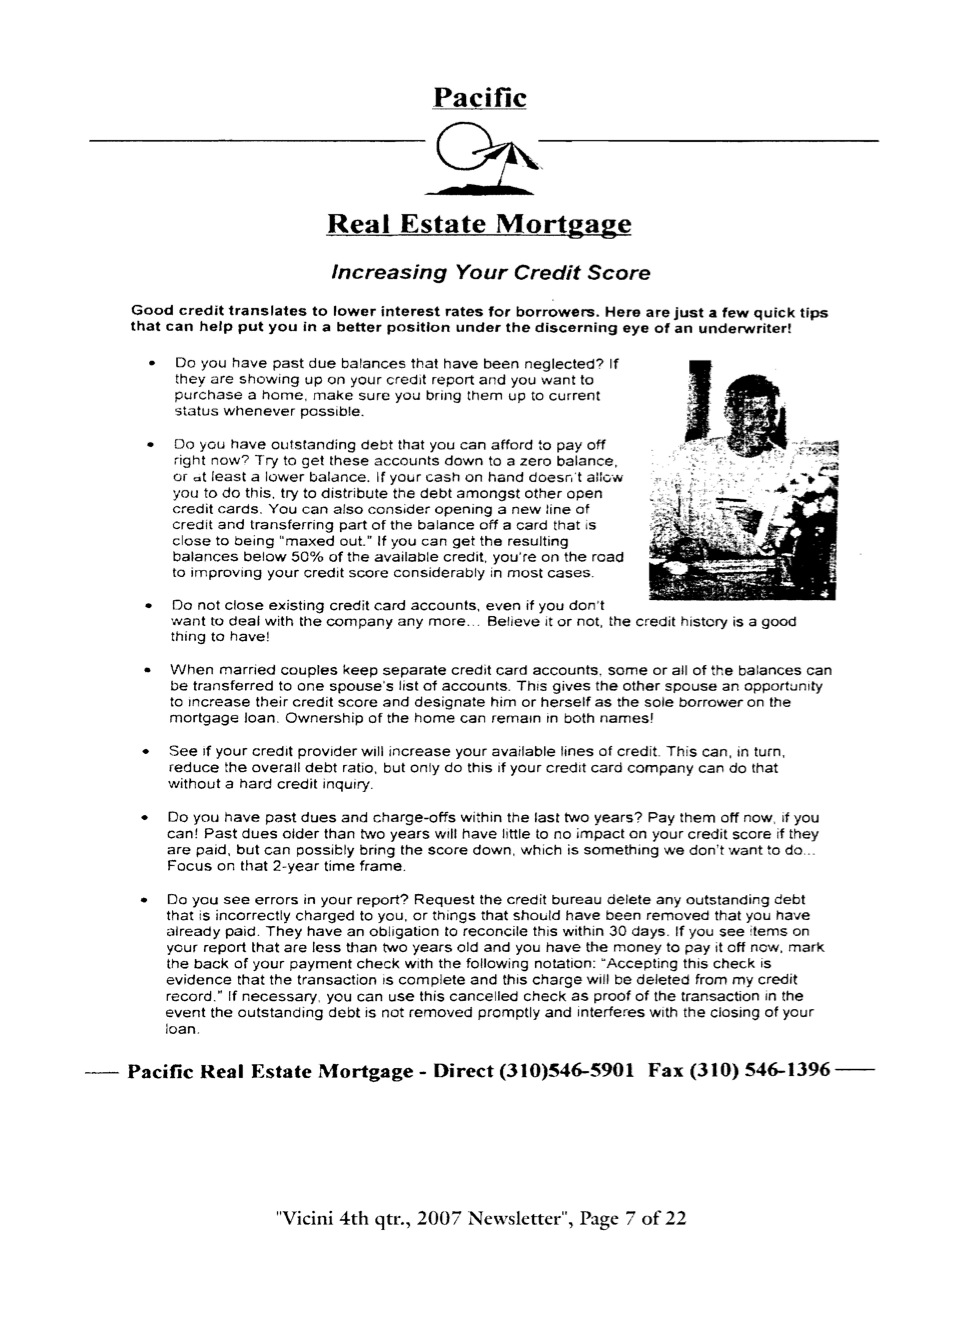 Pacific Real Estate Mortgage - Credit Scoring Tips_Page_1